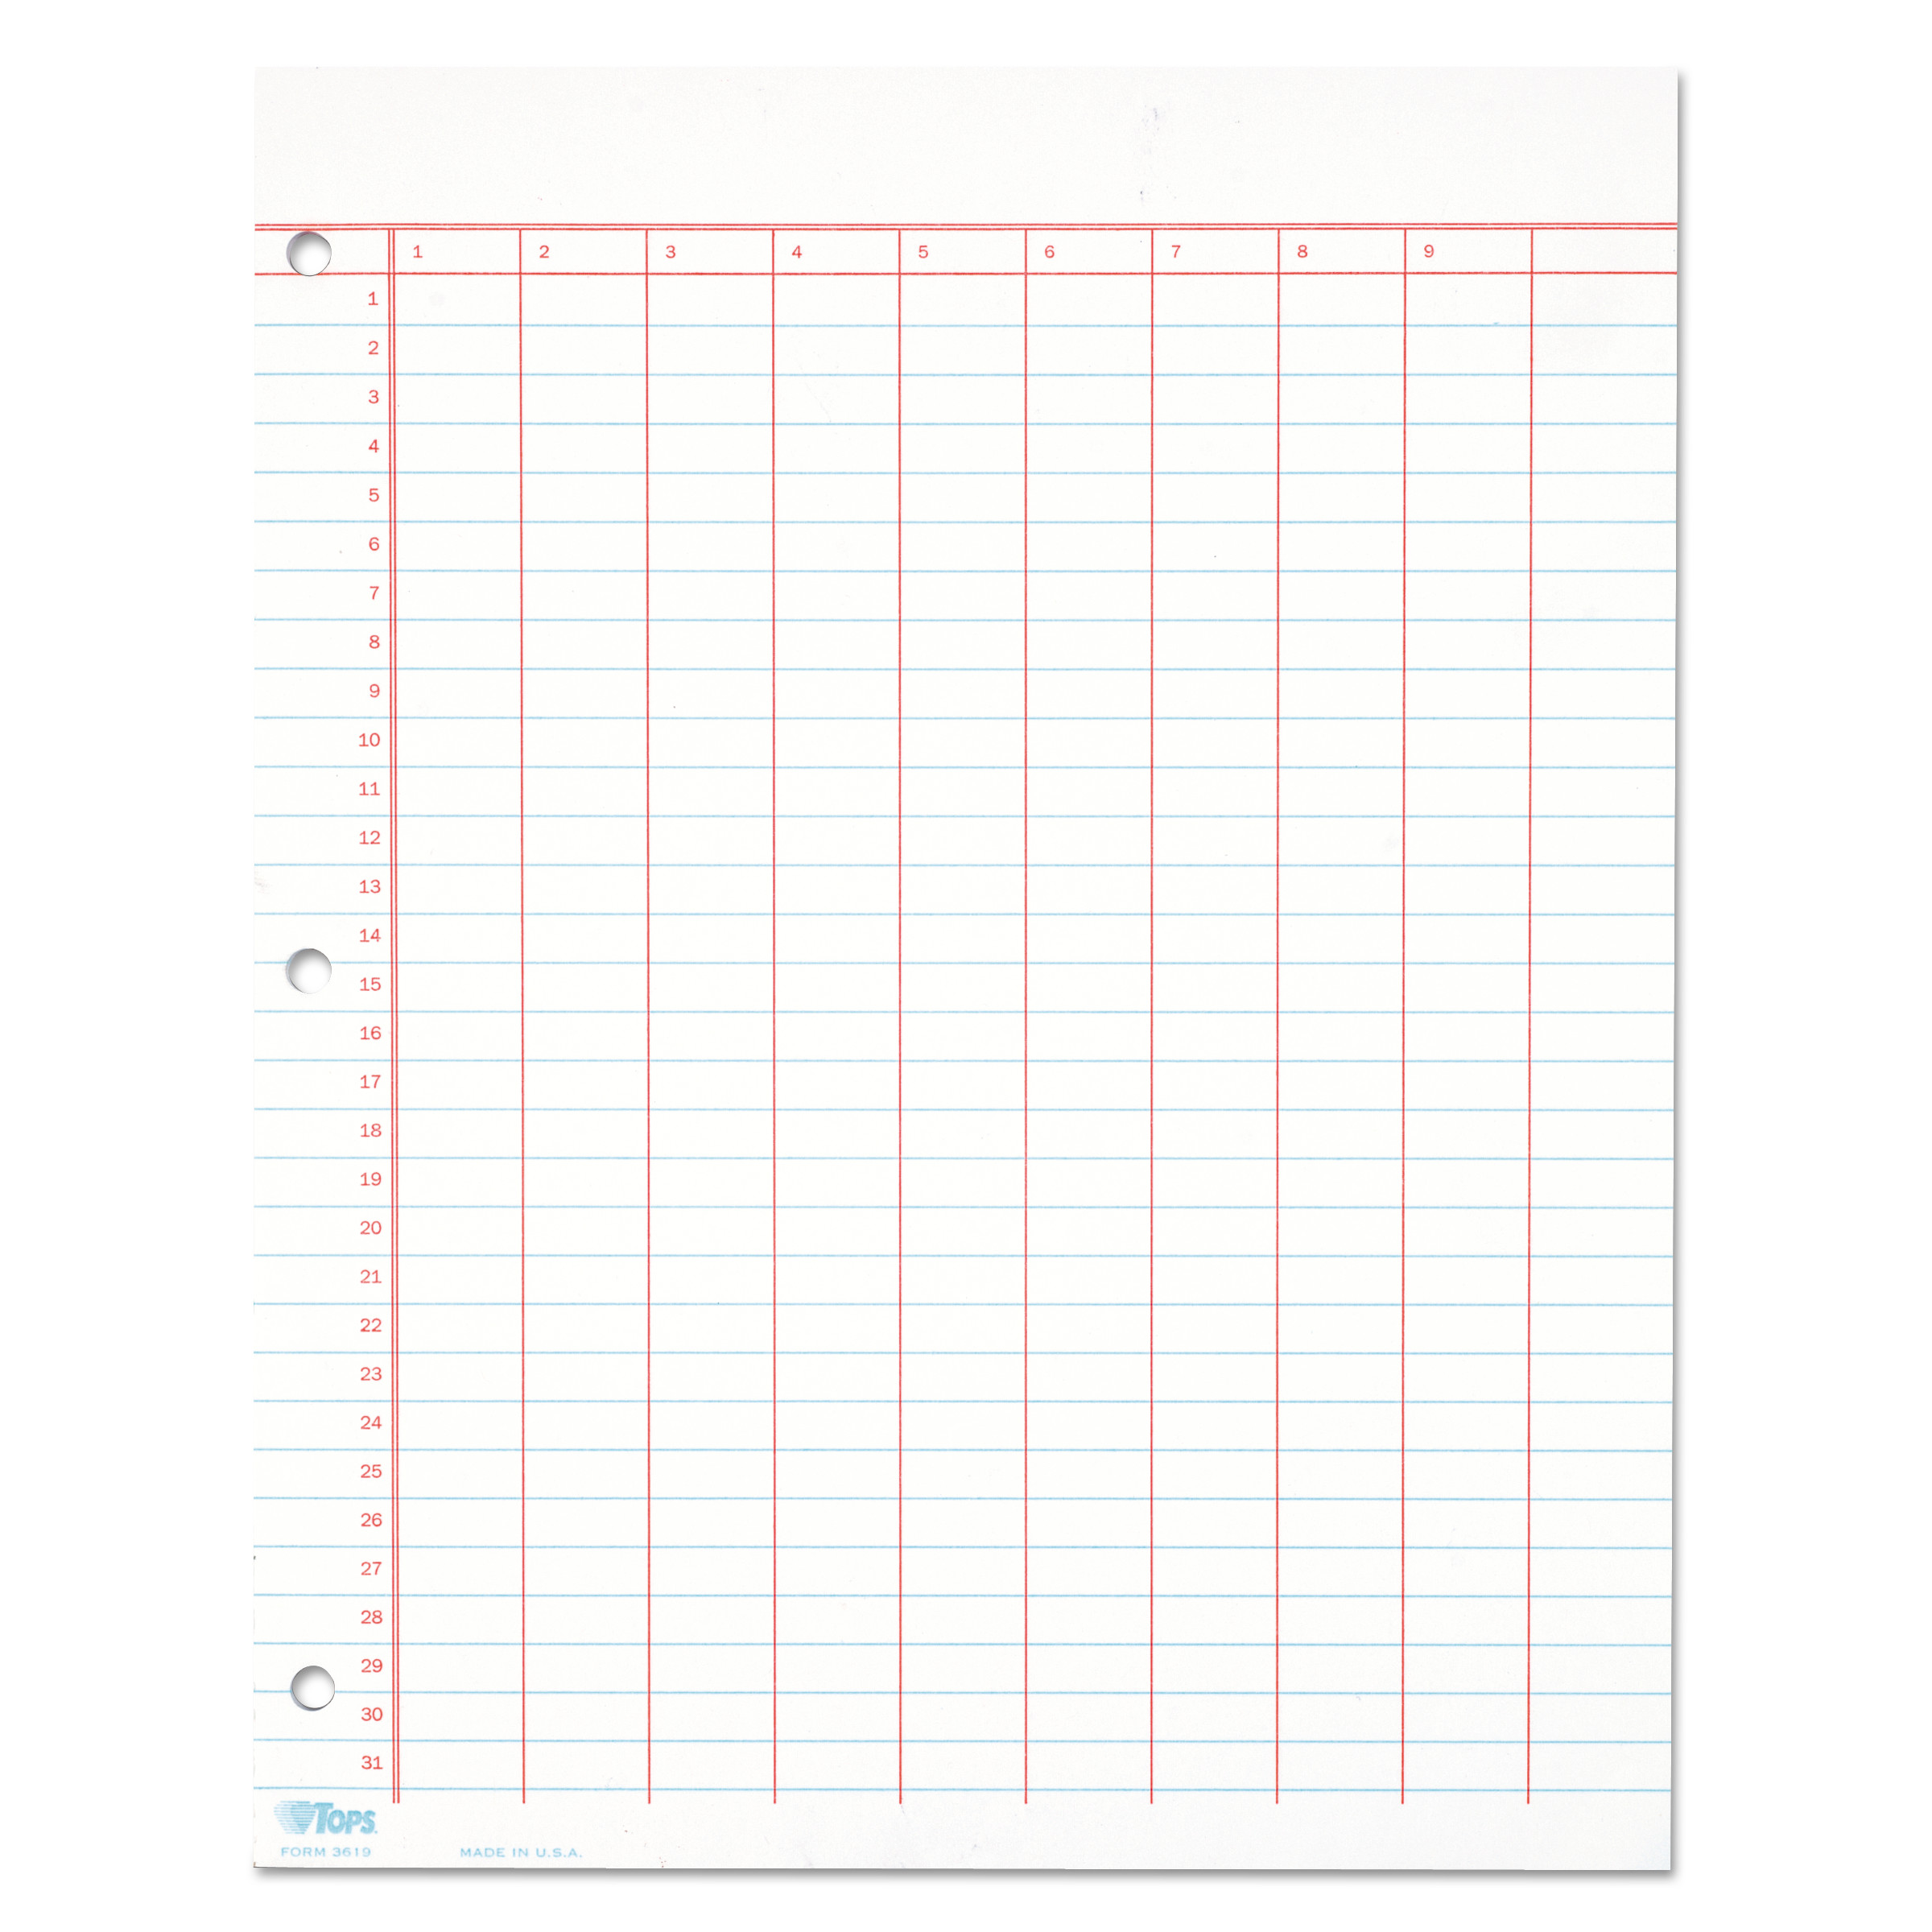  TOPS 3619 Data Pad w/Numbered Column Headings, 11 x 8.5, White, 50 Sheets (TOP3619) 